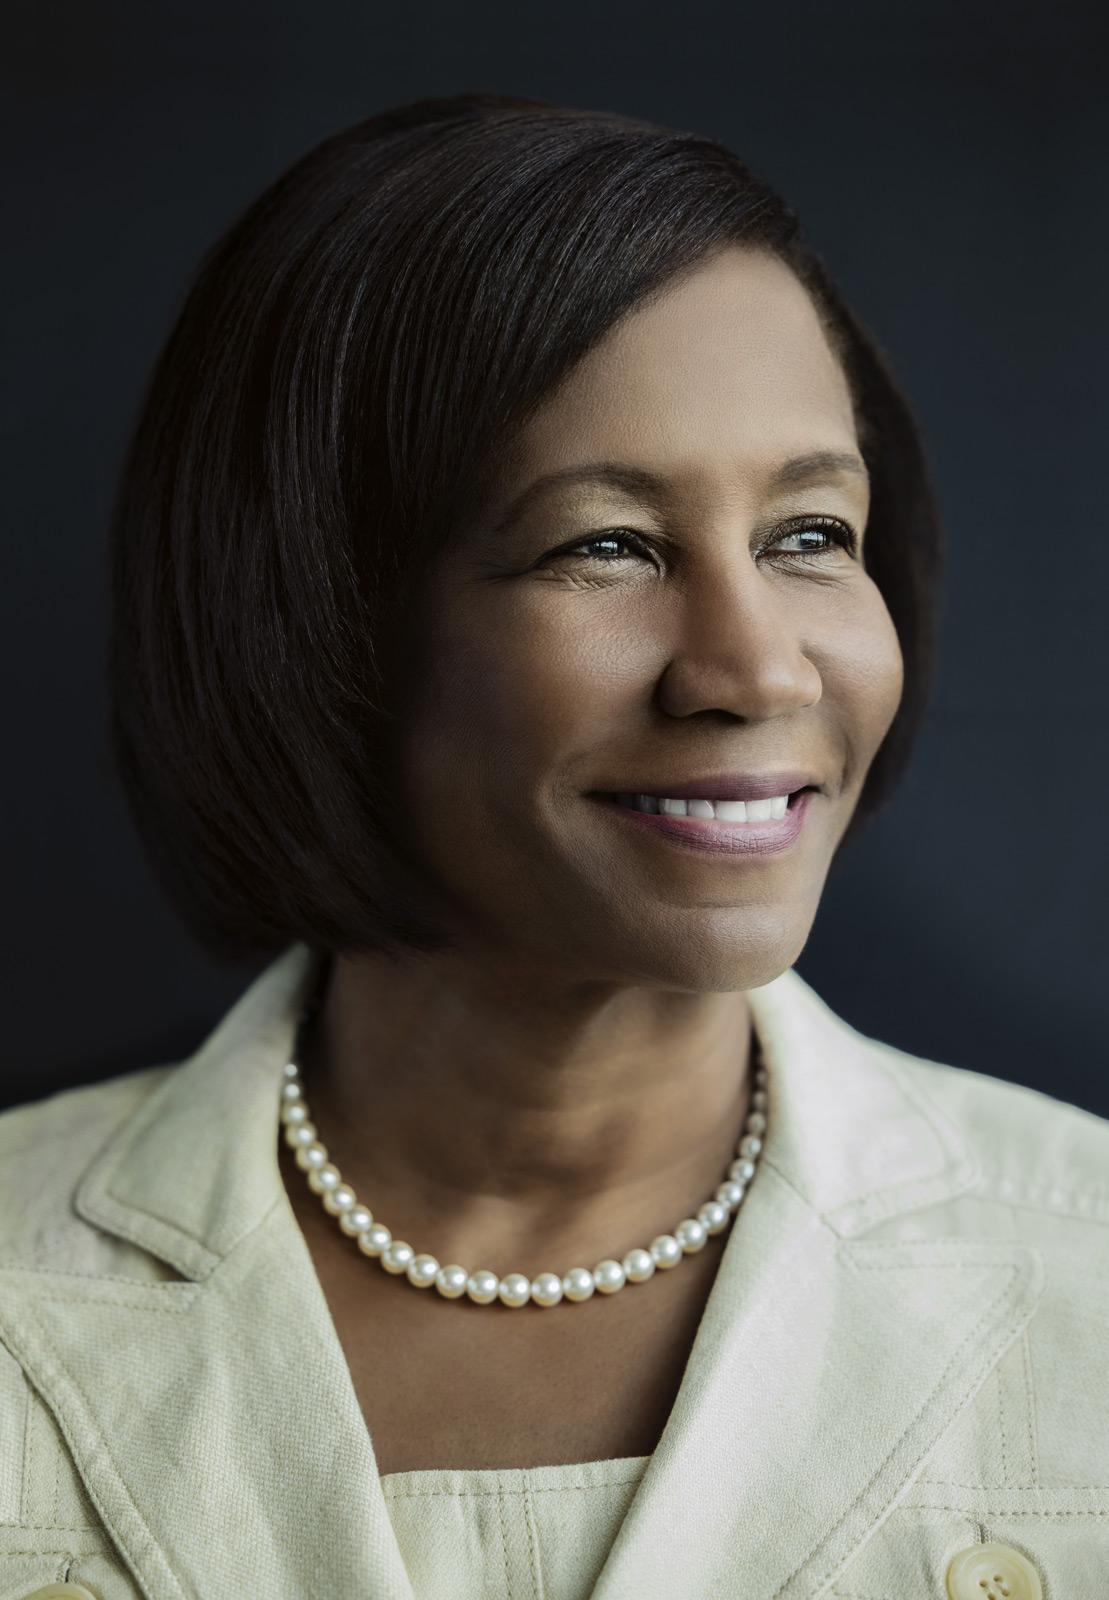 Lawrence University President Laurie A. Carter